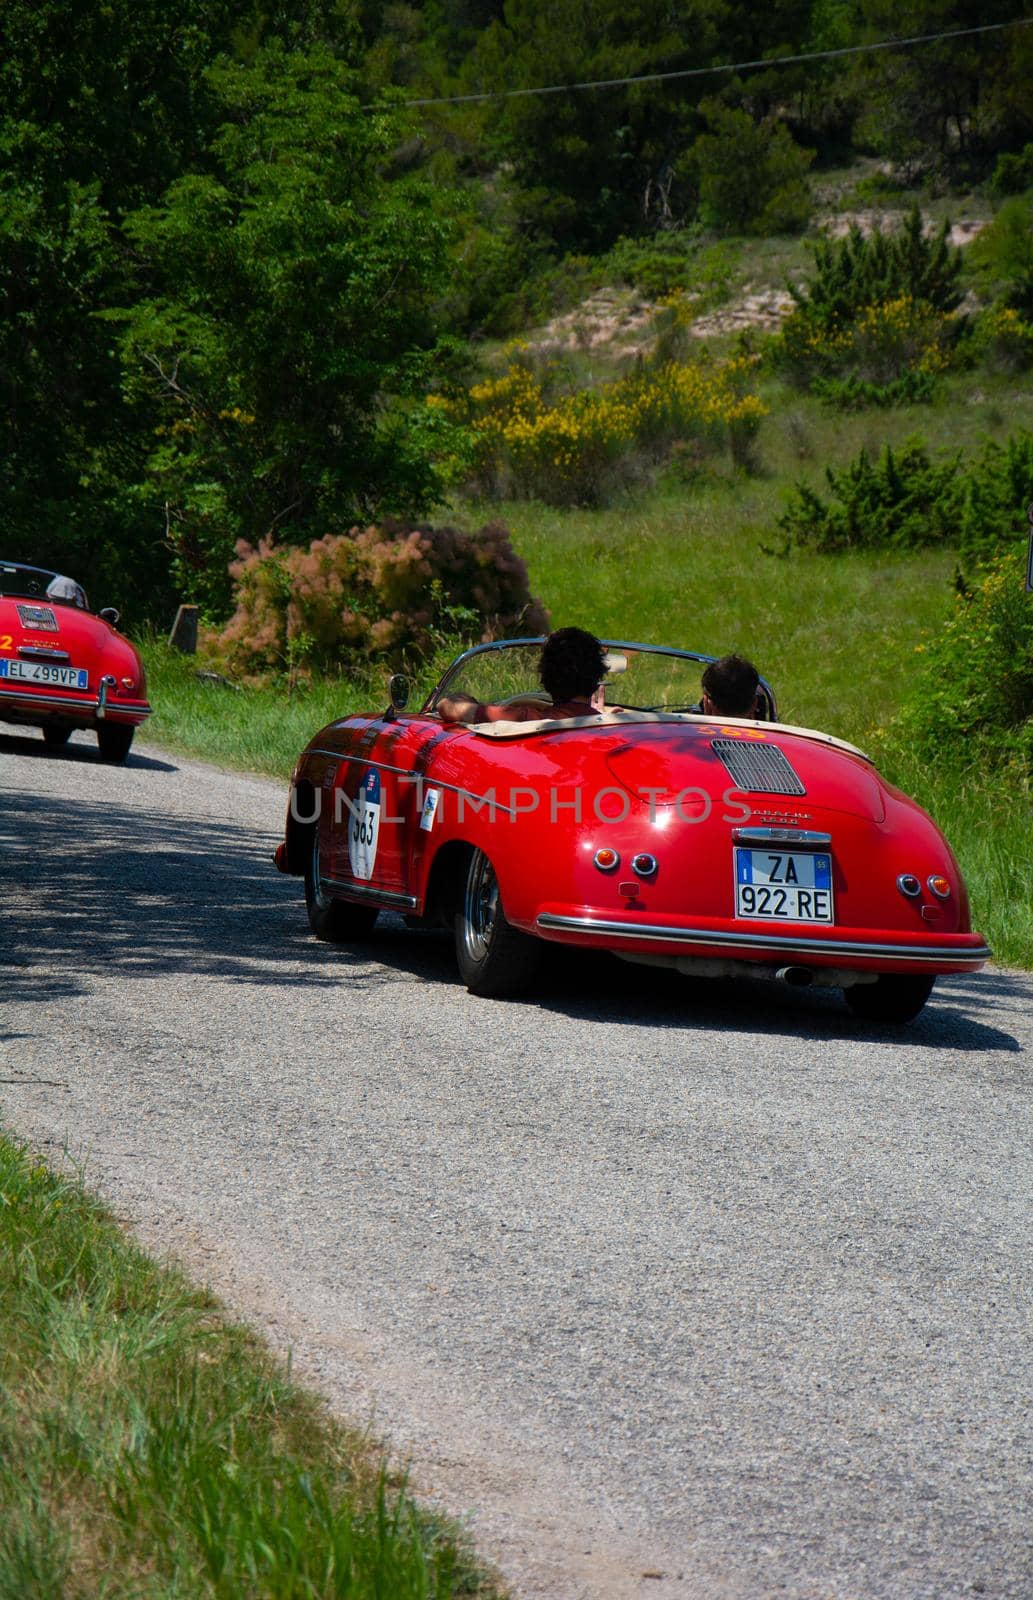 PORSCHE 356 1500 SPEEDSTER 1955 on an old racing car in rally Mille Miglia 2022 the famous italian historical race (1927-1957 by massimocampanari